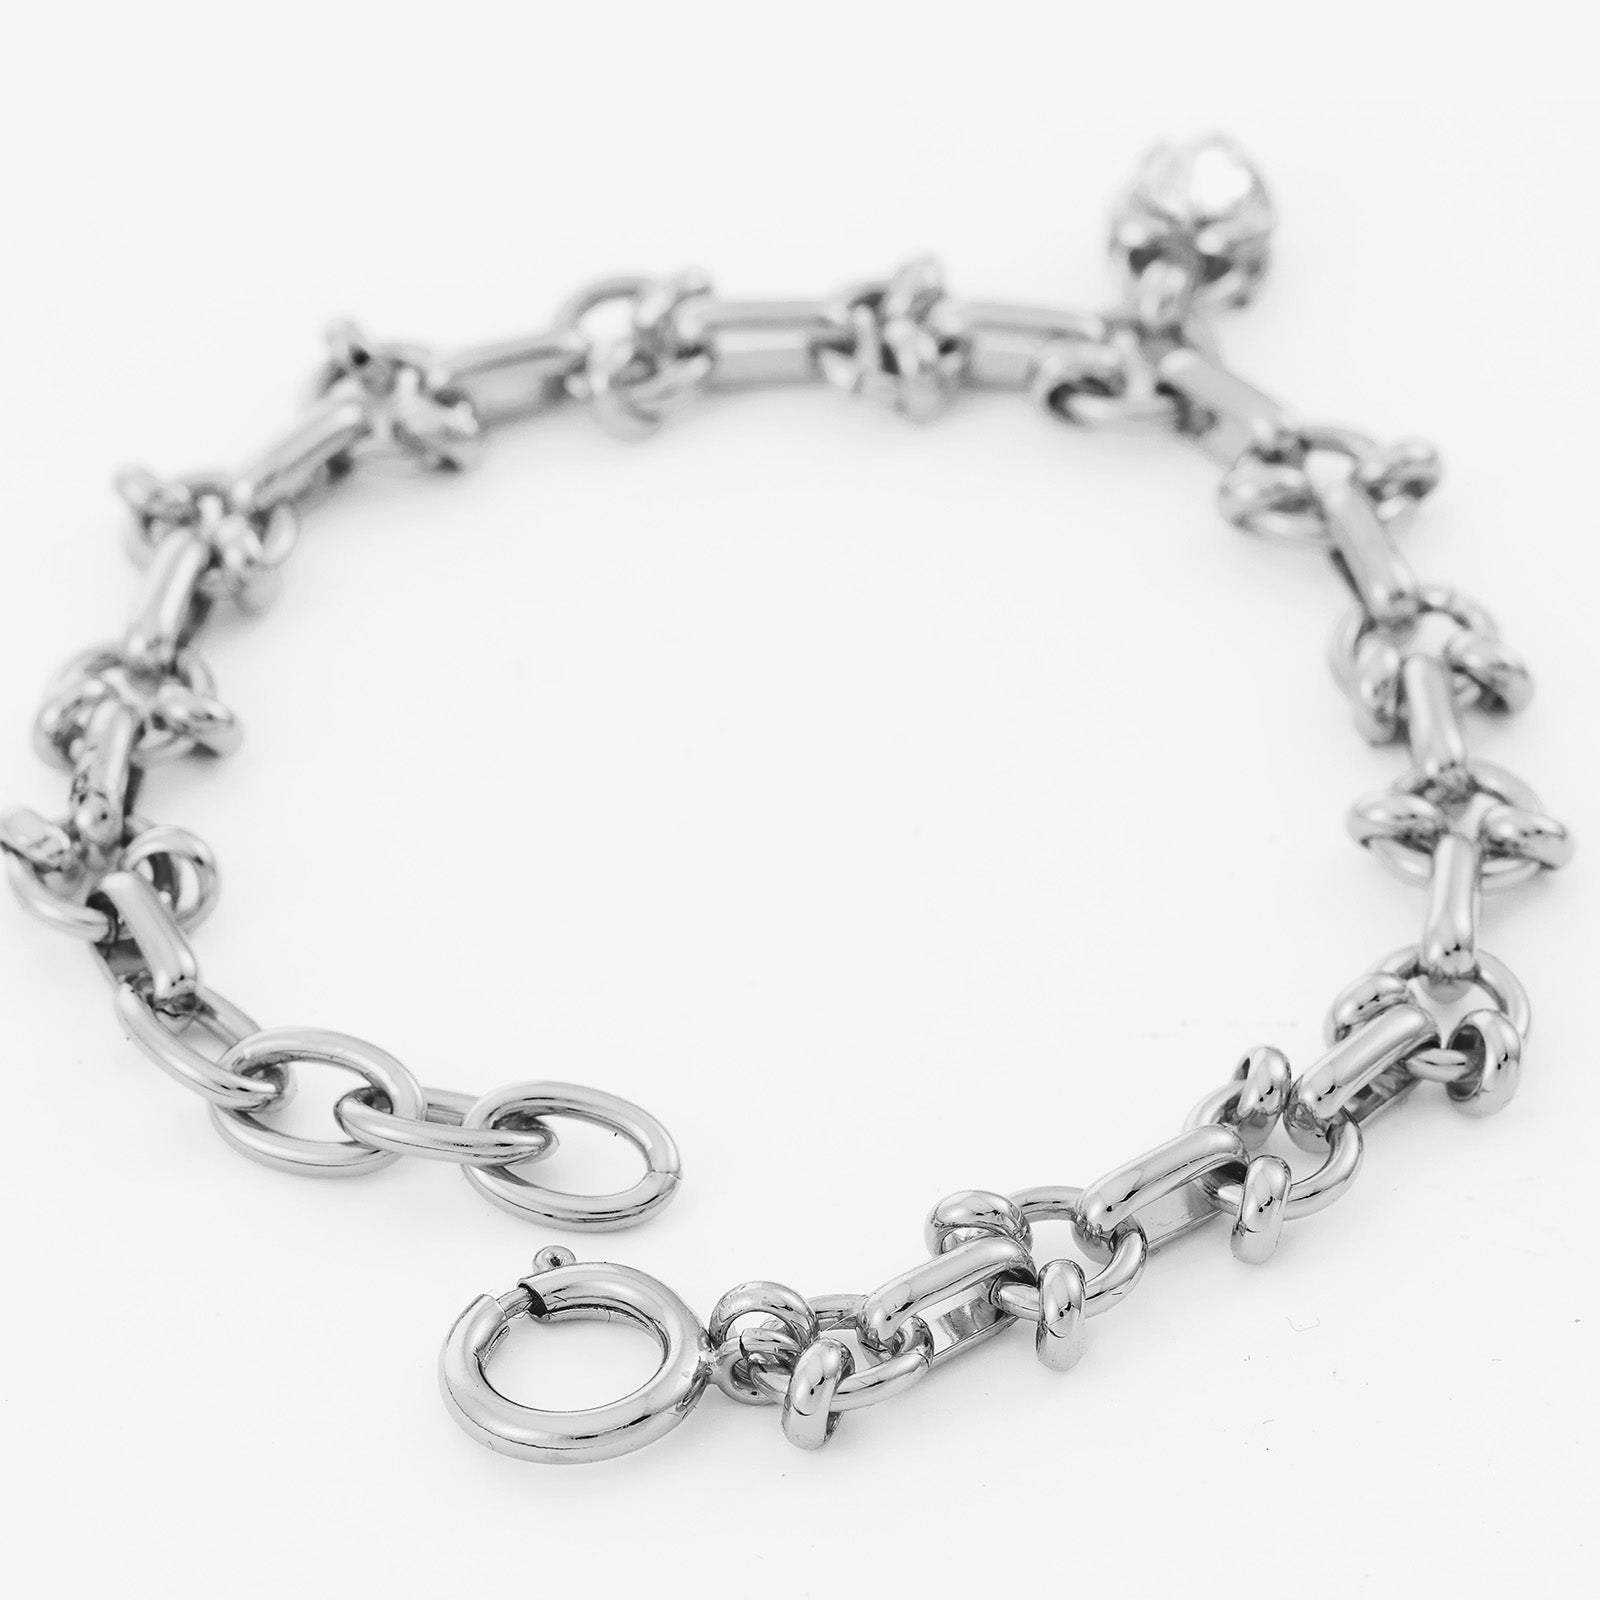 Diamond Heart Chain Bracelet in White Gold, an elegant embrace of love and luxury, this bracelet features linked hearts adorned with diamonds, set in a luminous white gold chain, making it a meaningful and stylish addition to your jewelry collection